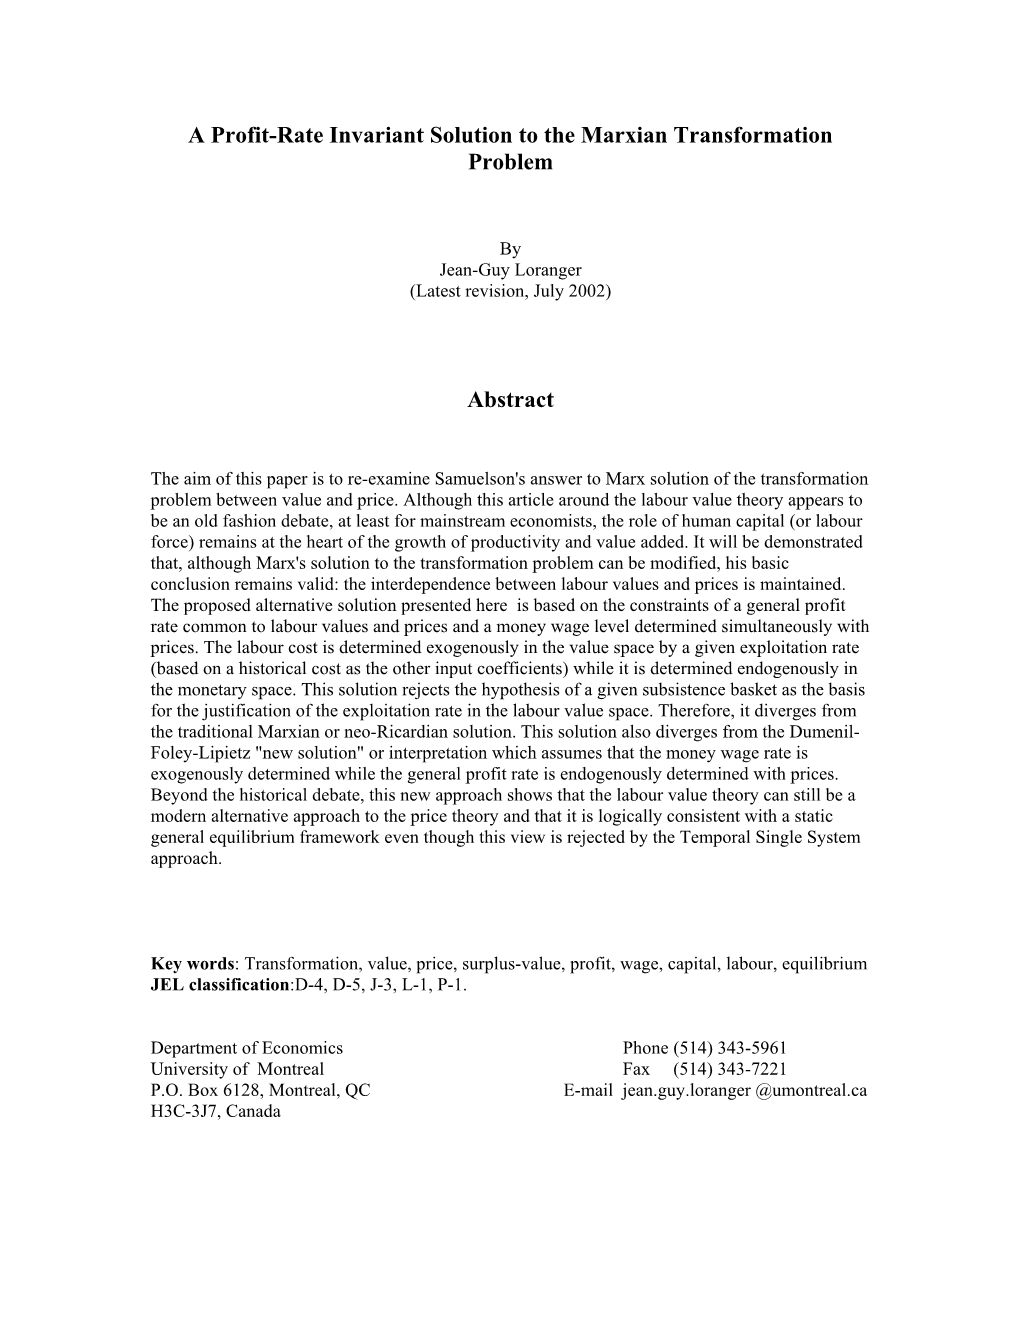 A Profit-Rate Invariant Solution to the Marxian Transformation Problem Abstract